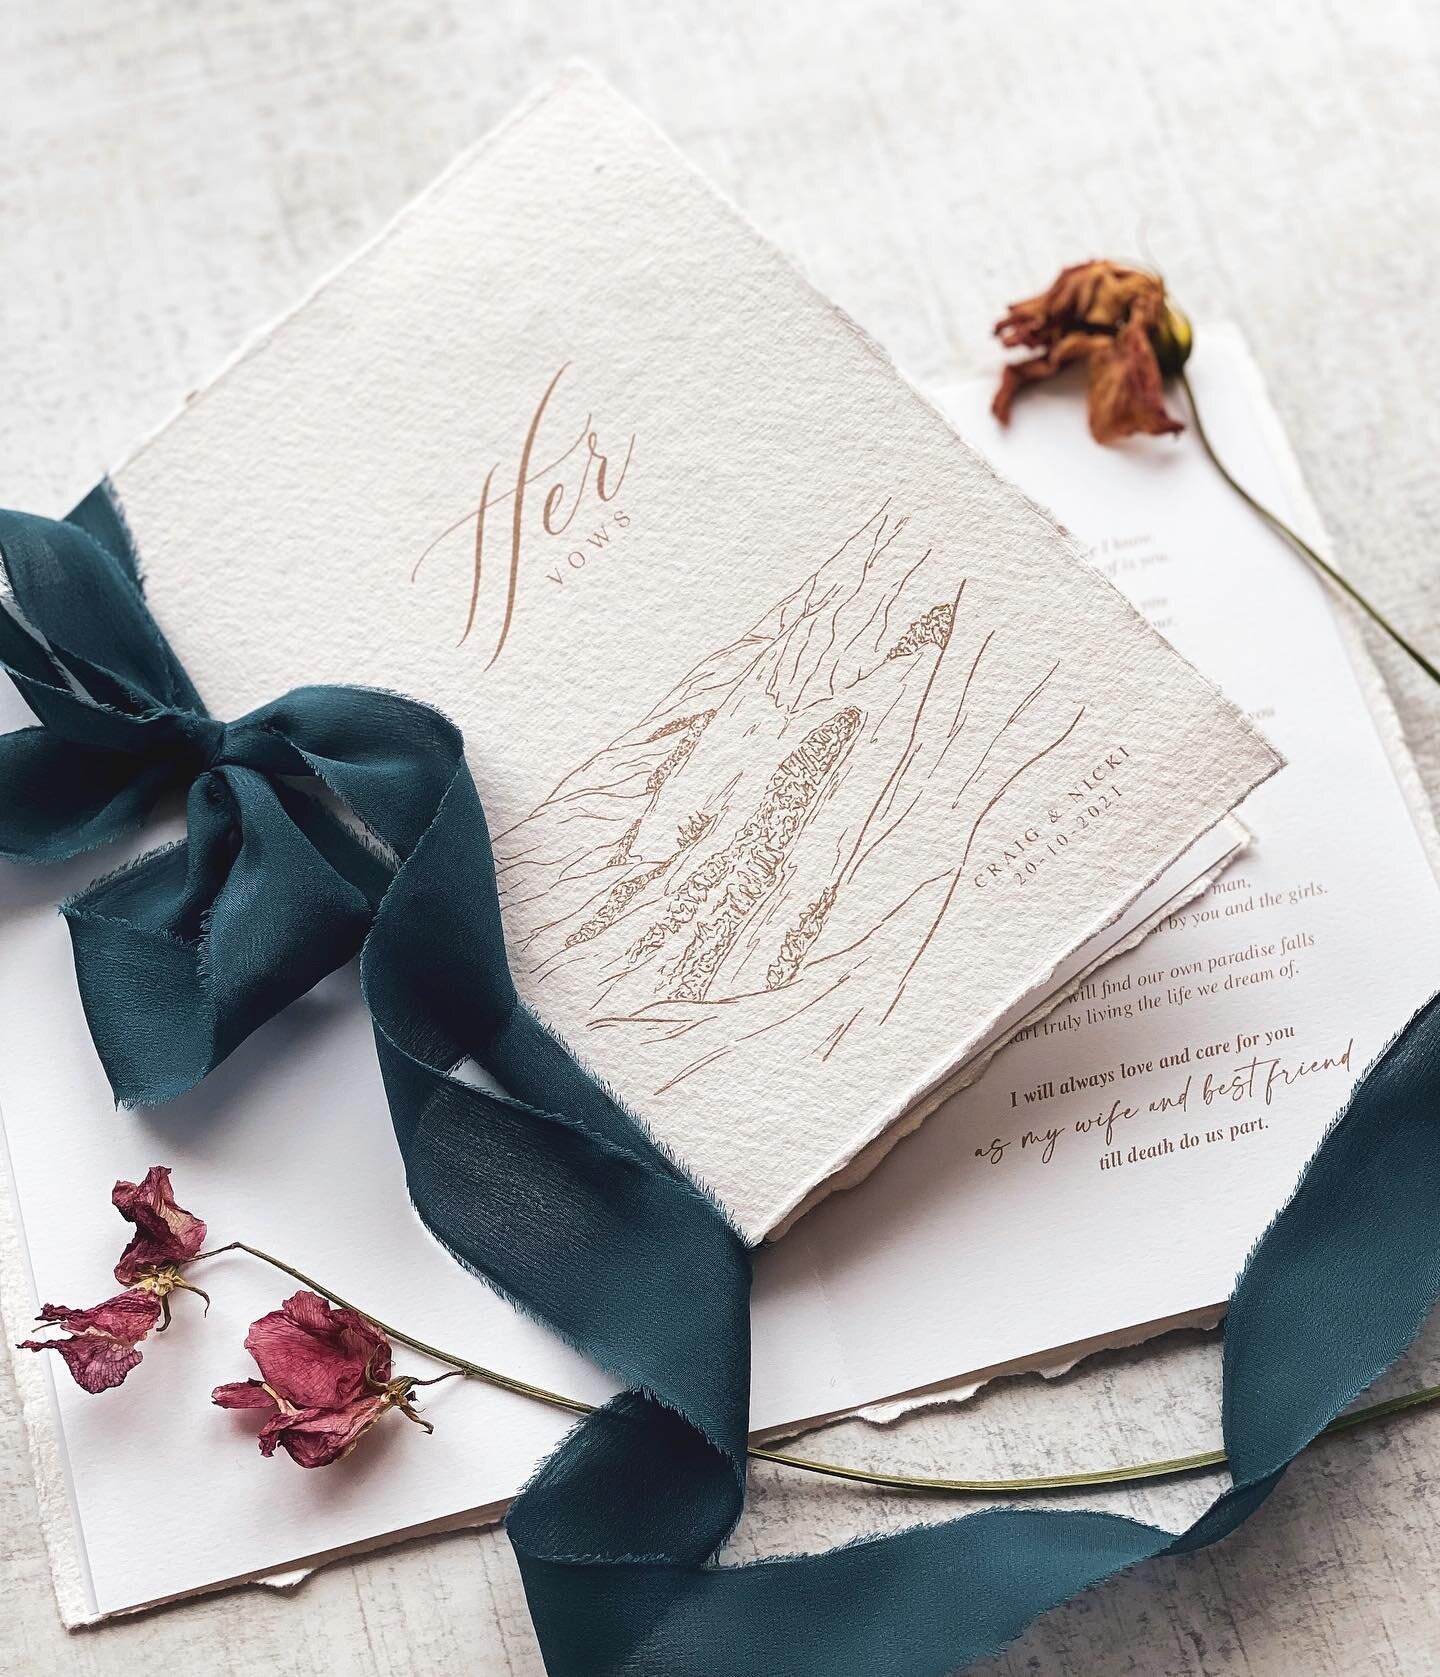 // V O W  B O O K S //

The ultimate wedding keepsake. 
We love creating these beautiful vow books filled with your most intimate promises and wishes. They will forever be a reminder of the love you and your partner share for each other and the memor